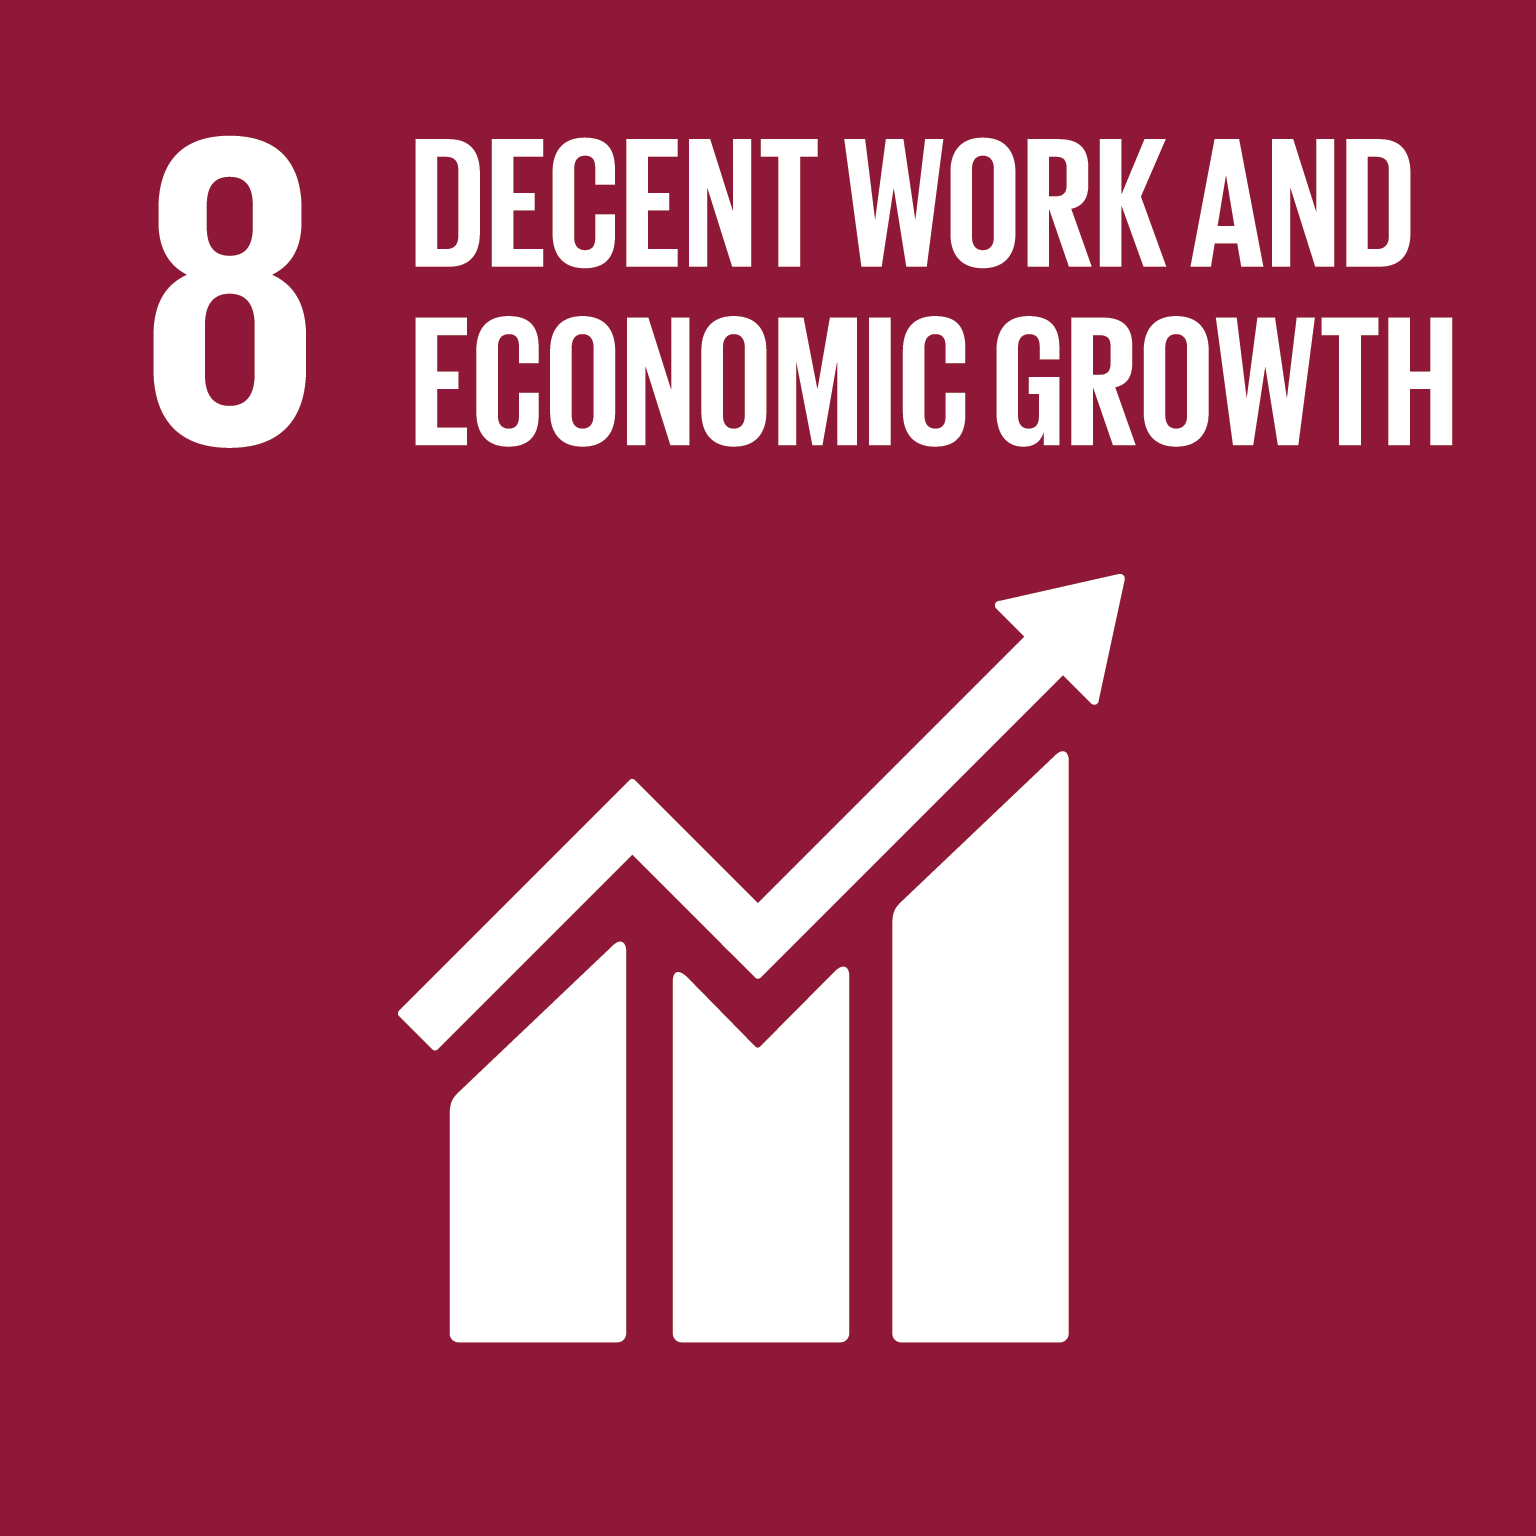 Development Policies for Sustainable Economic Growth in Southern Africa